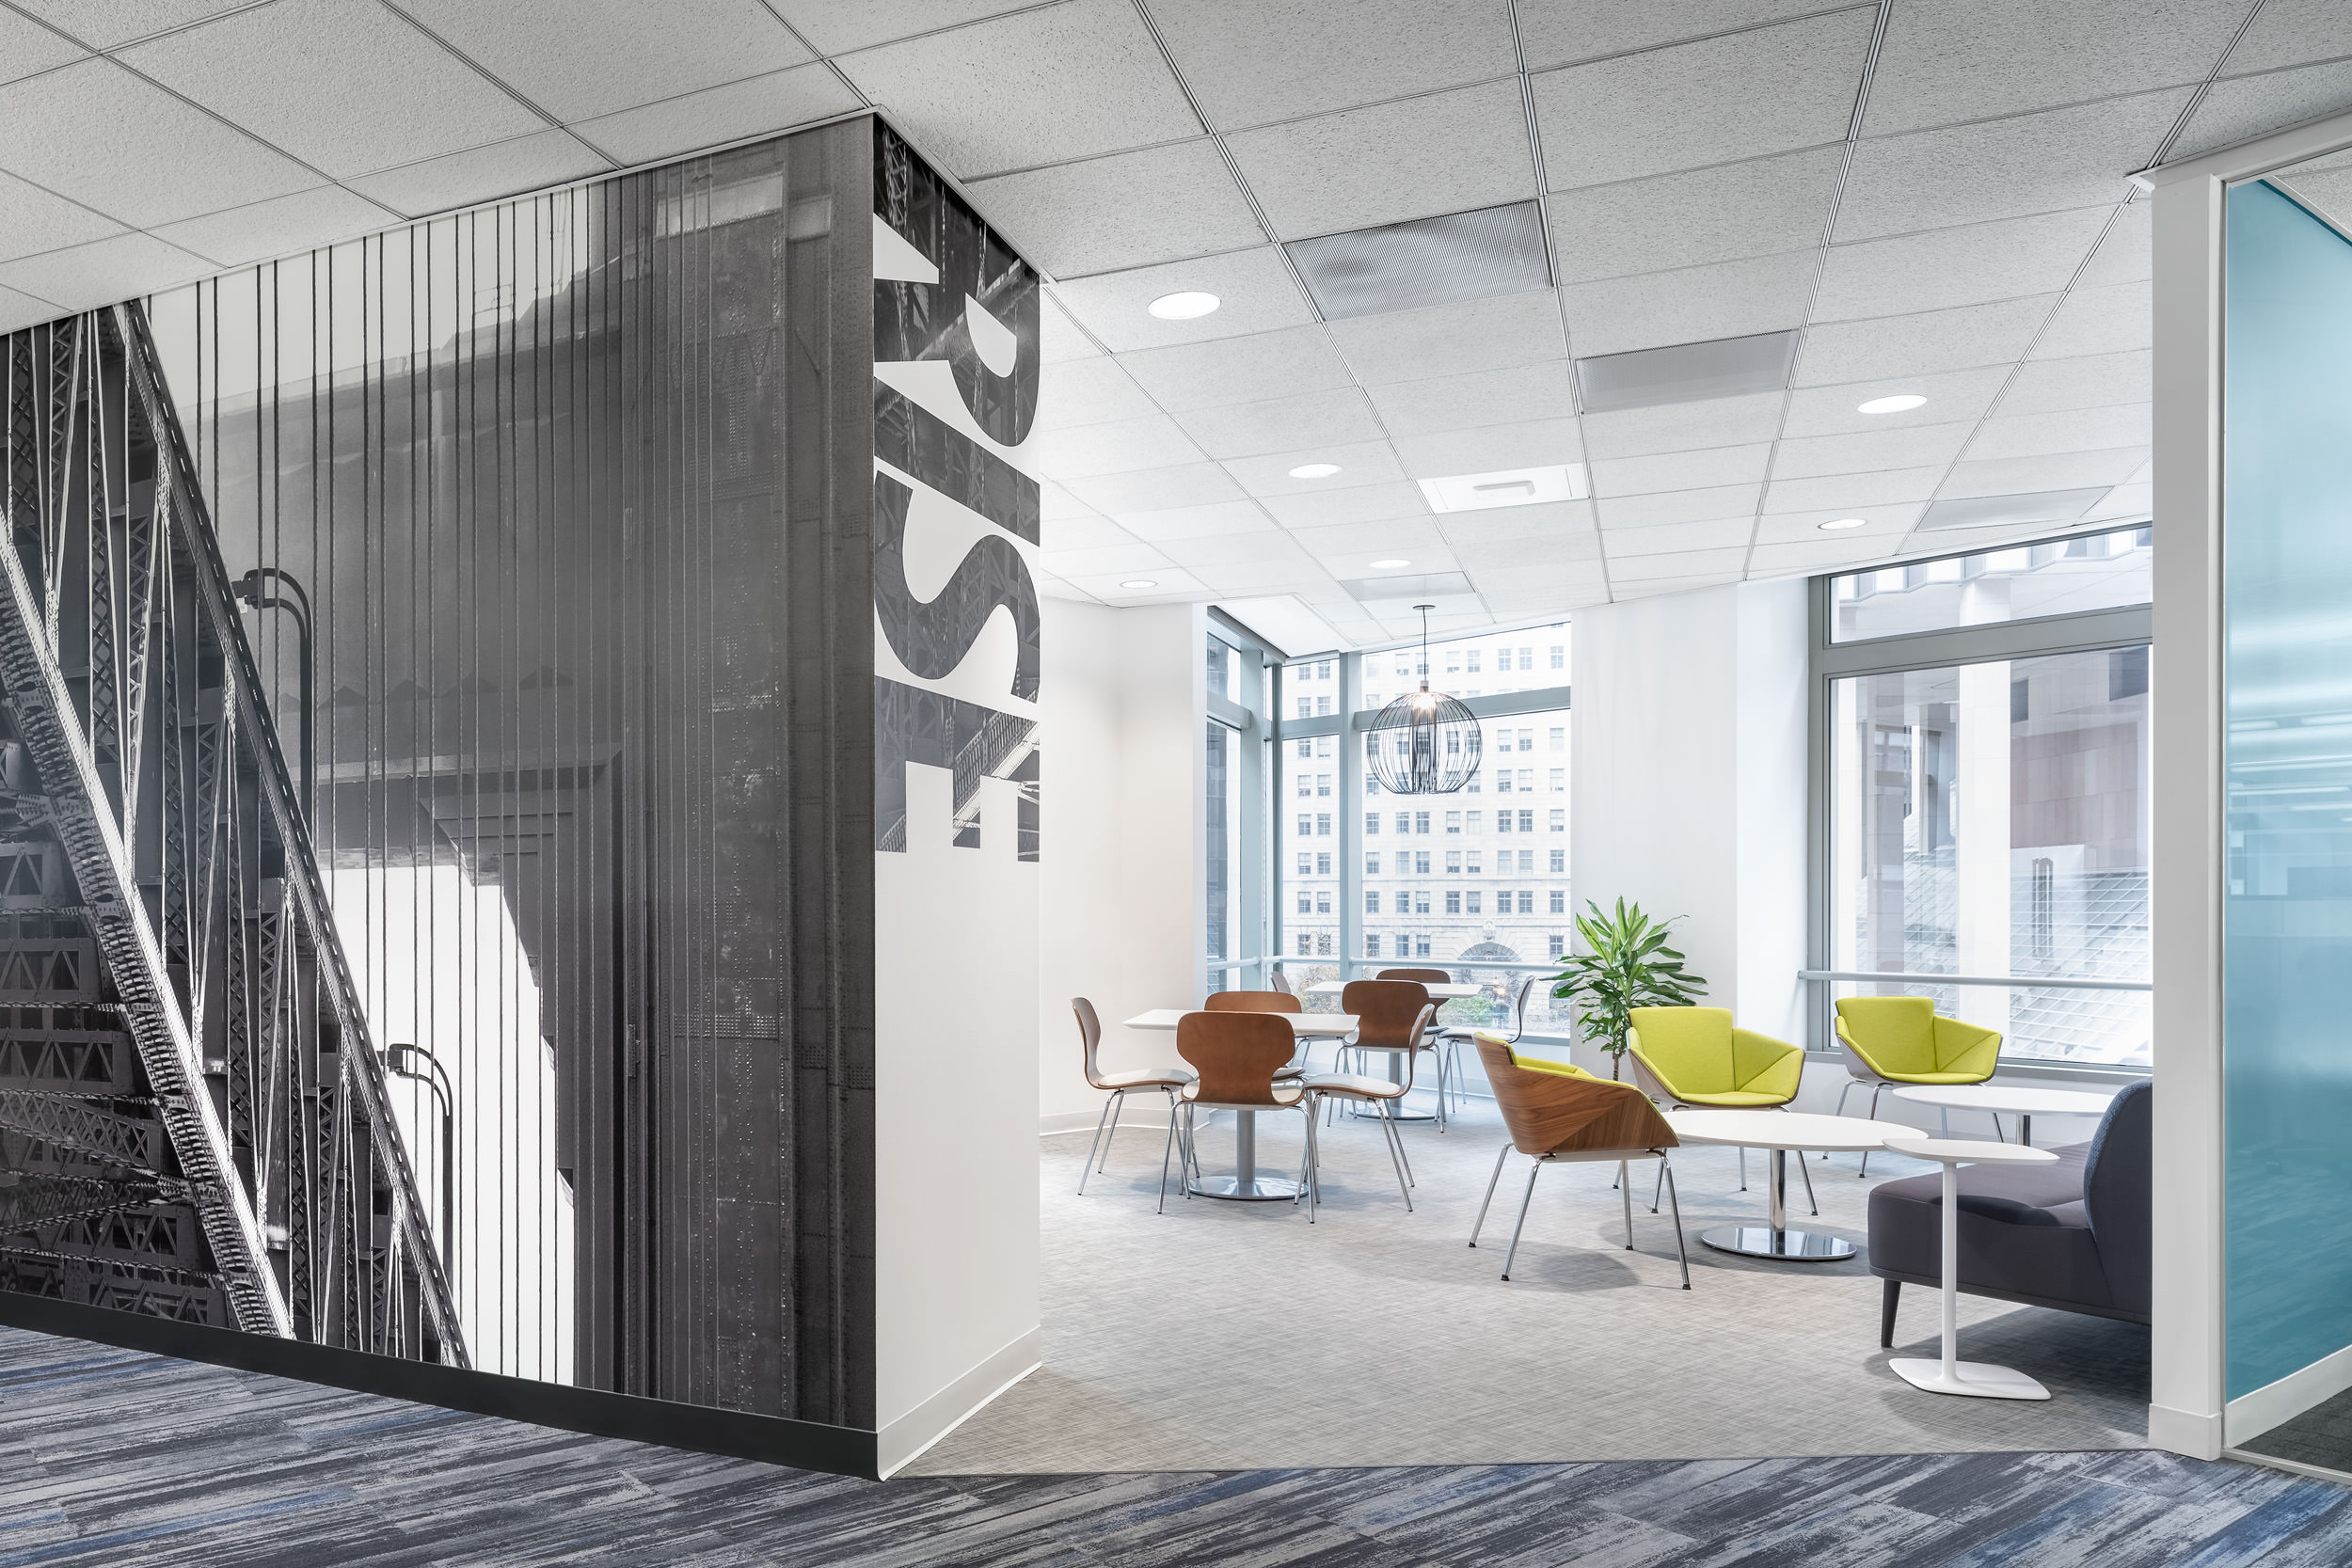 Tenant Improvement for CBRE Property Management Division Featured on Office Snapshots